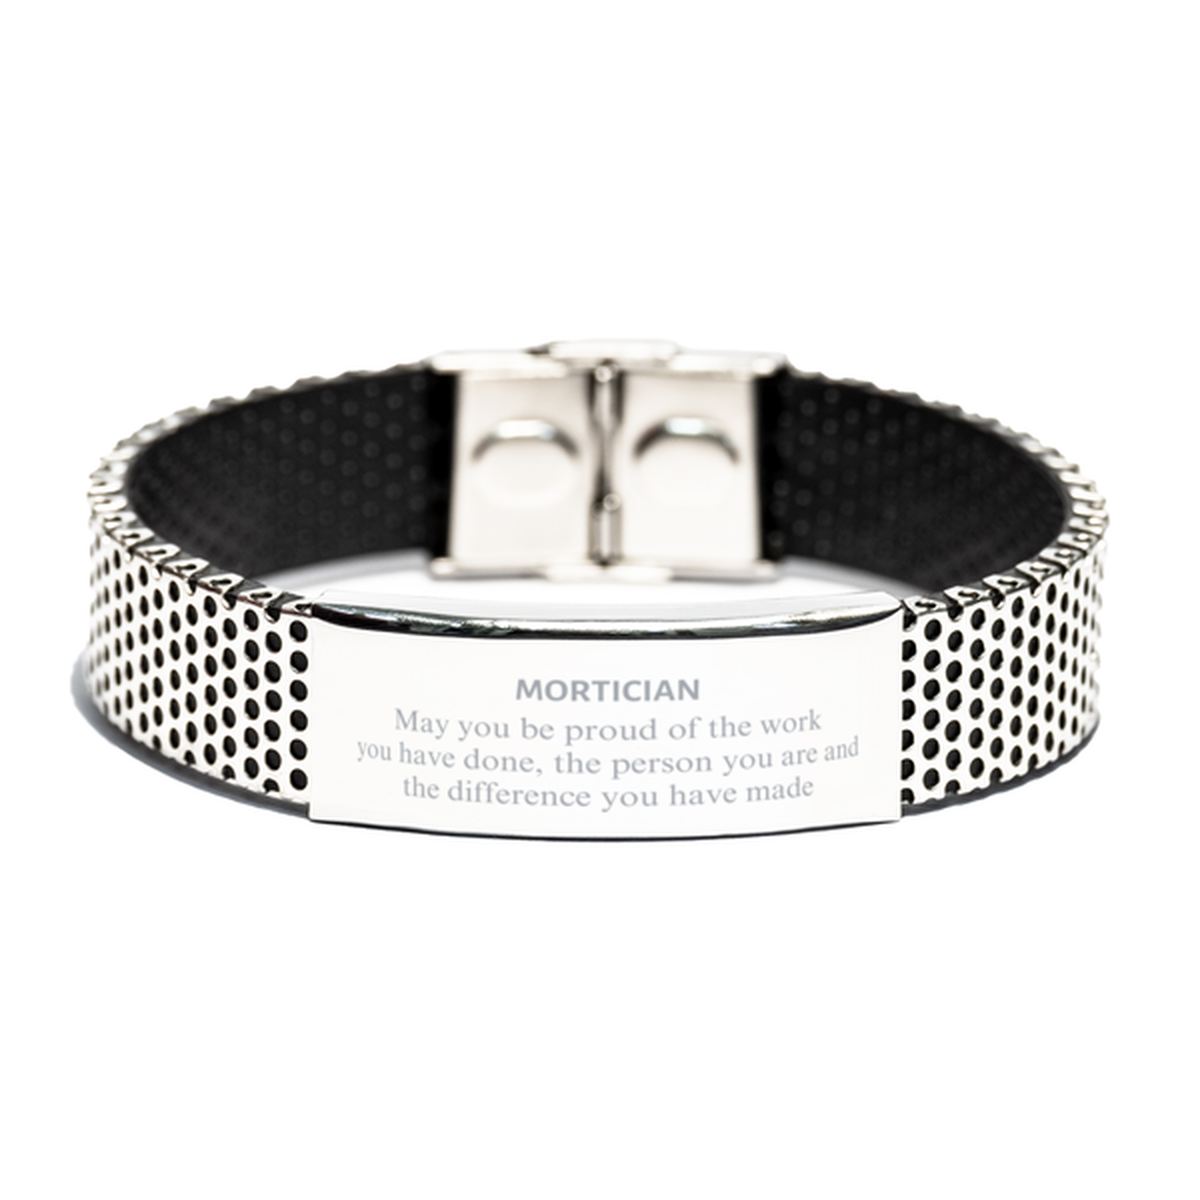 Mortician May you be proud of the work you have done, Retirement Mortician Stainless Steel Bracelet for Colleague Appreciation Gifts Amazing for Mortician